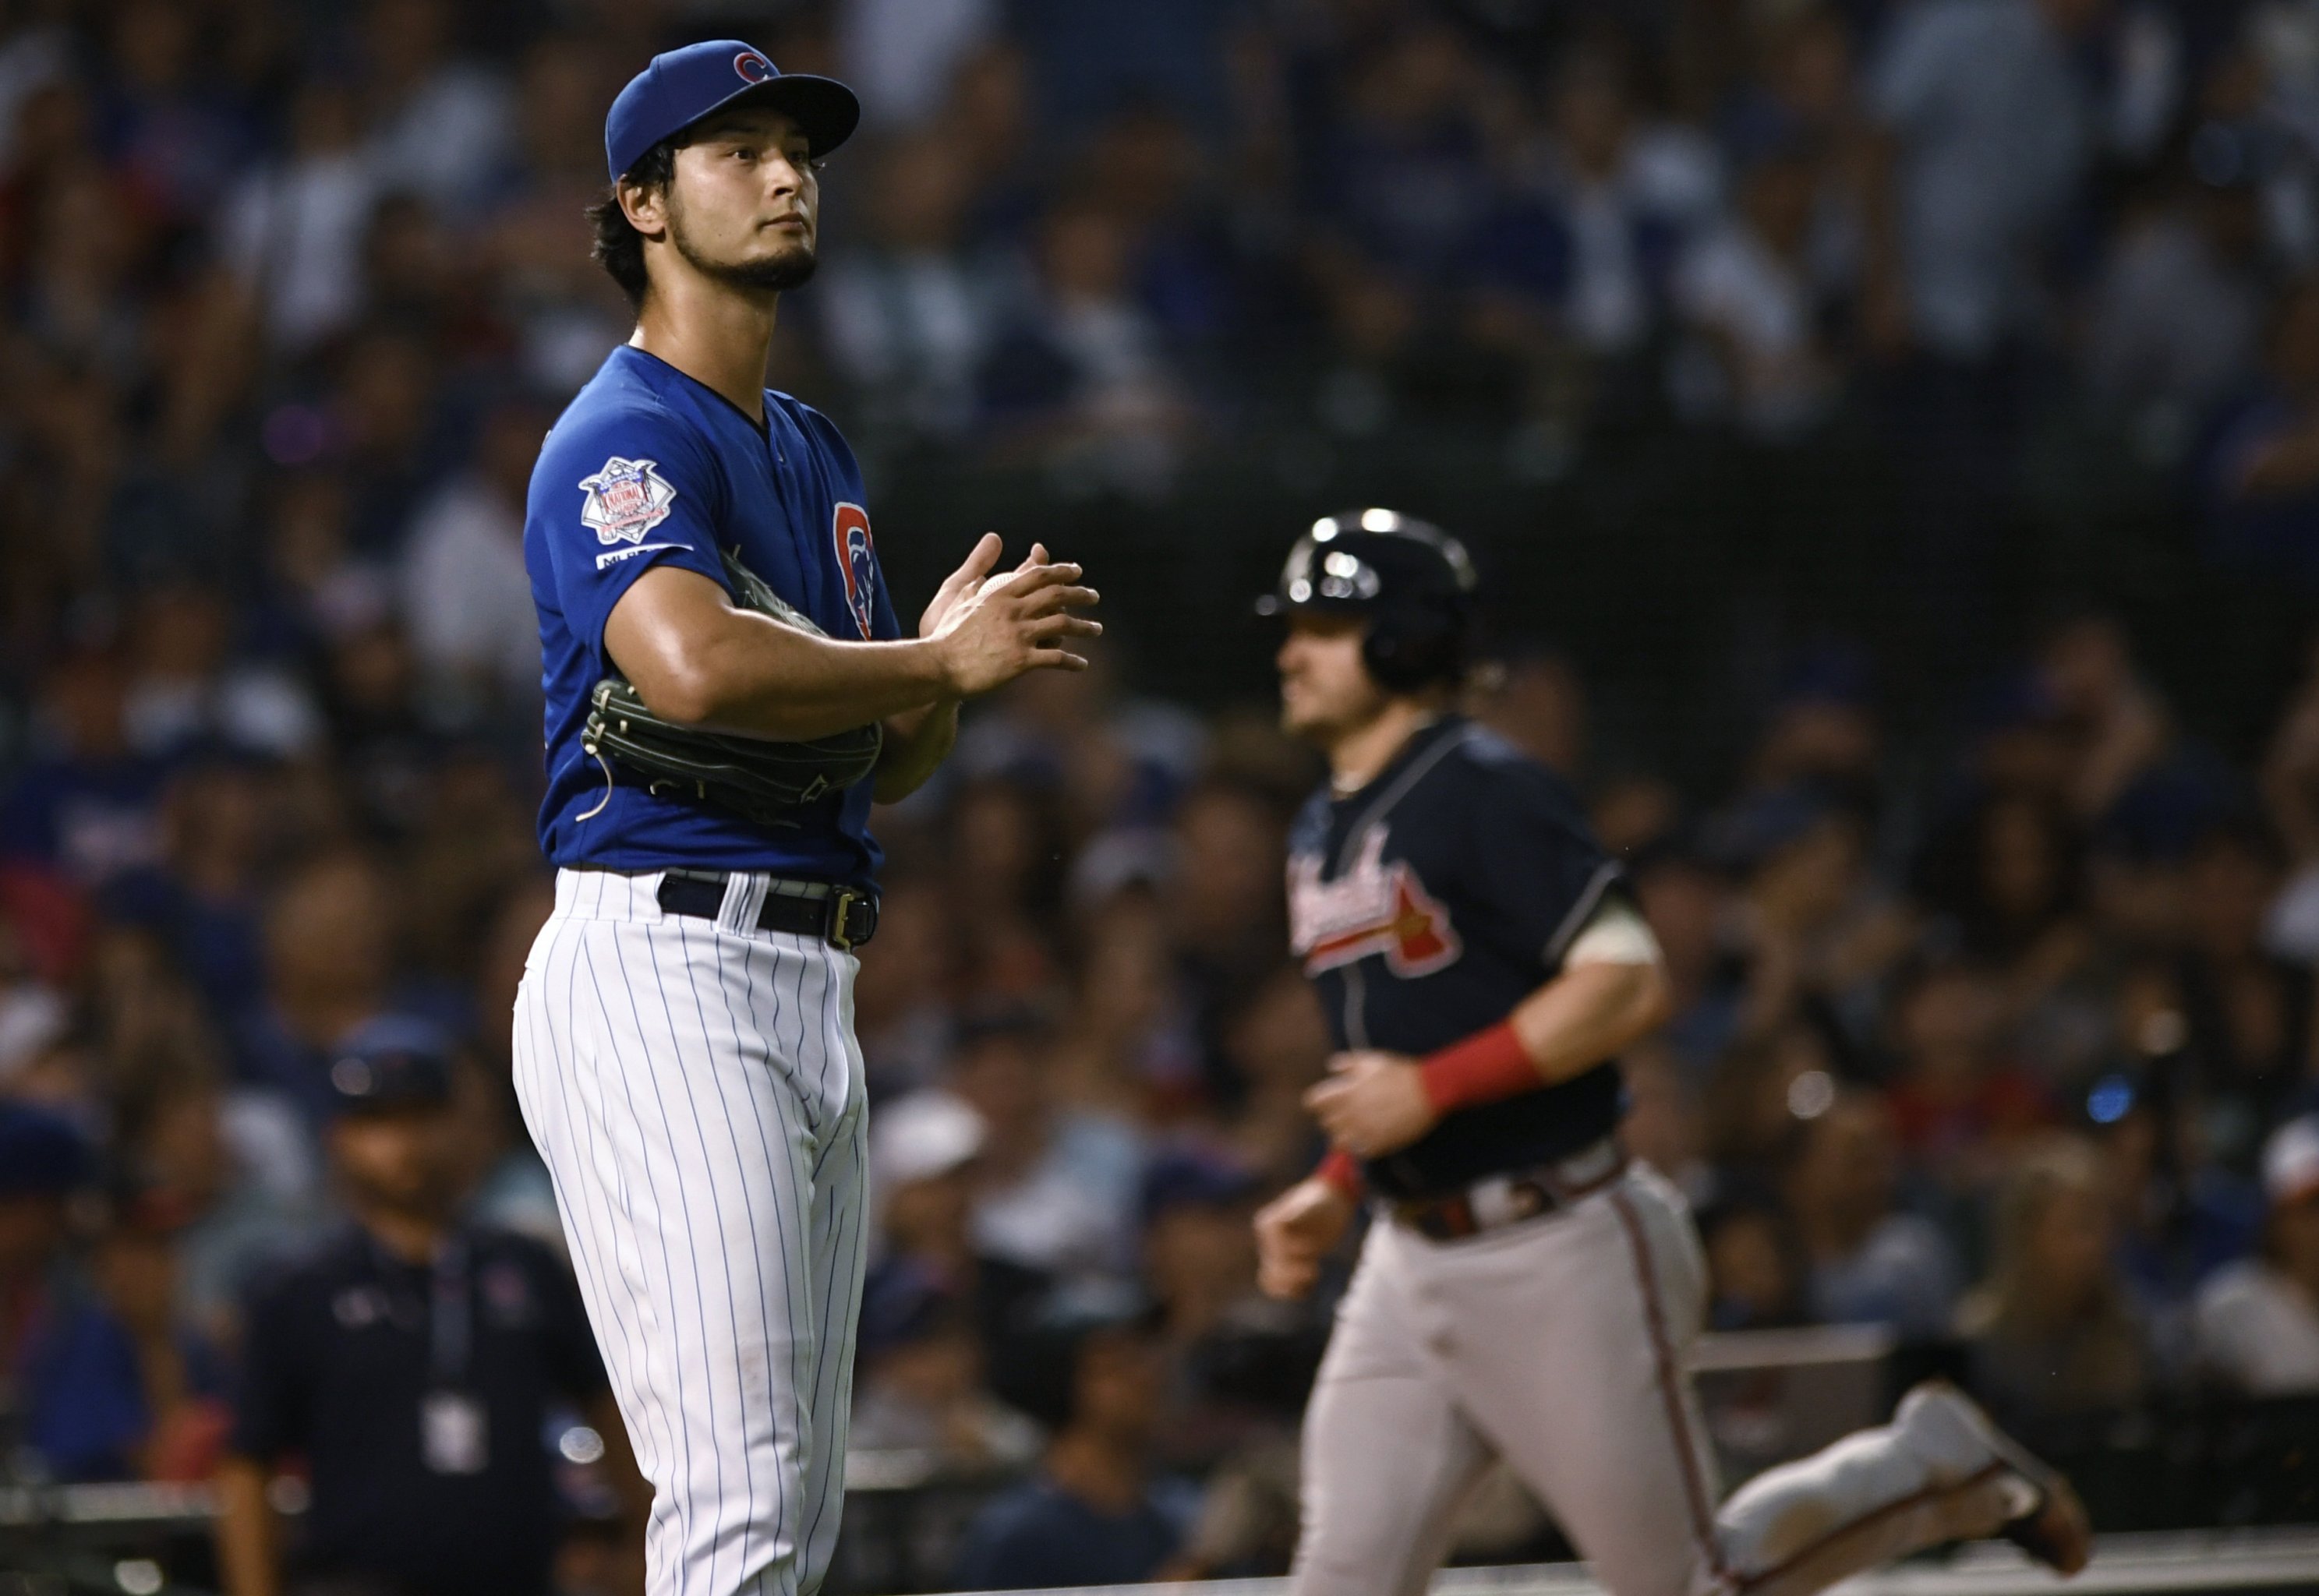 Yu Darvish's GQ magazine history only makes Cubs' ace more likable